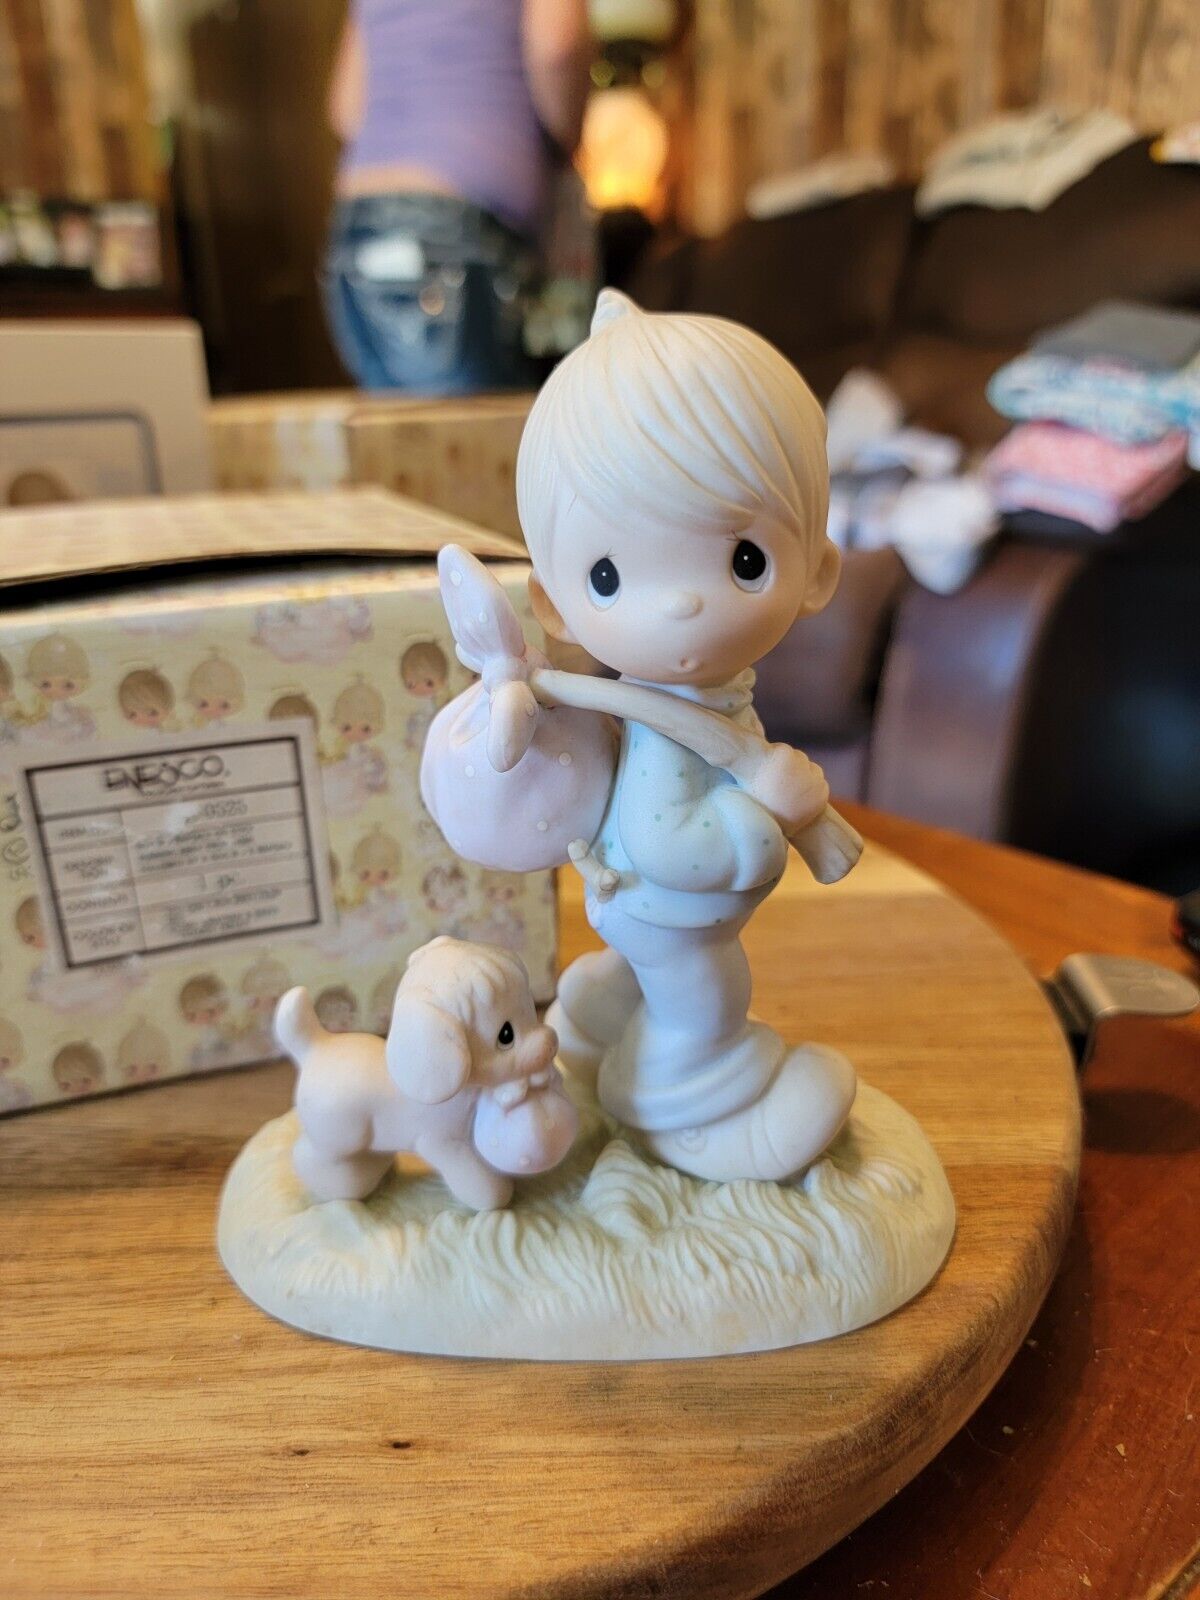 Precious Moments Figurine-You Can't Run Away From God-E-0525 Puppy Dog 1983.